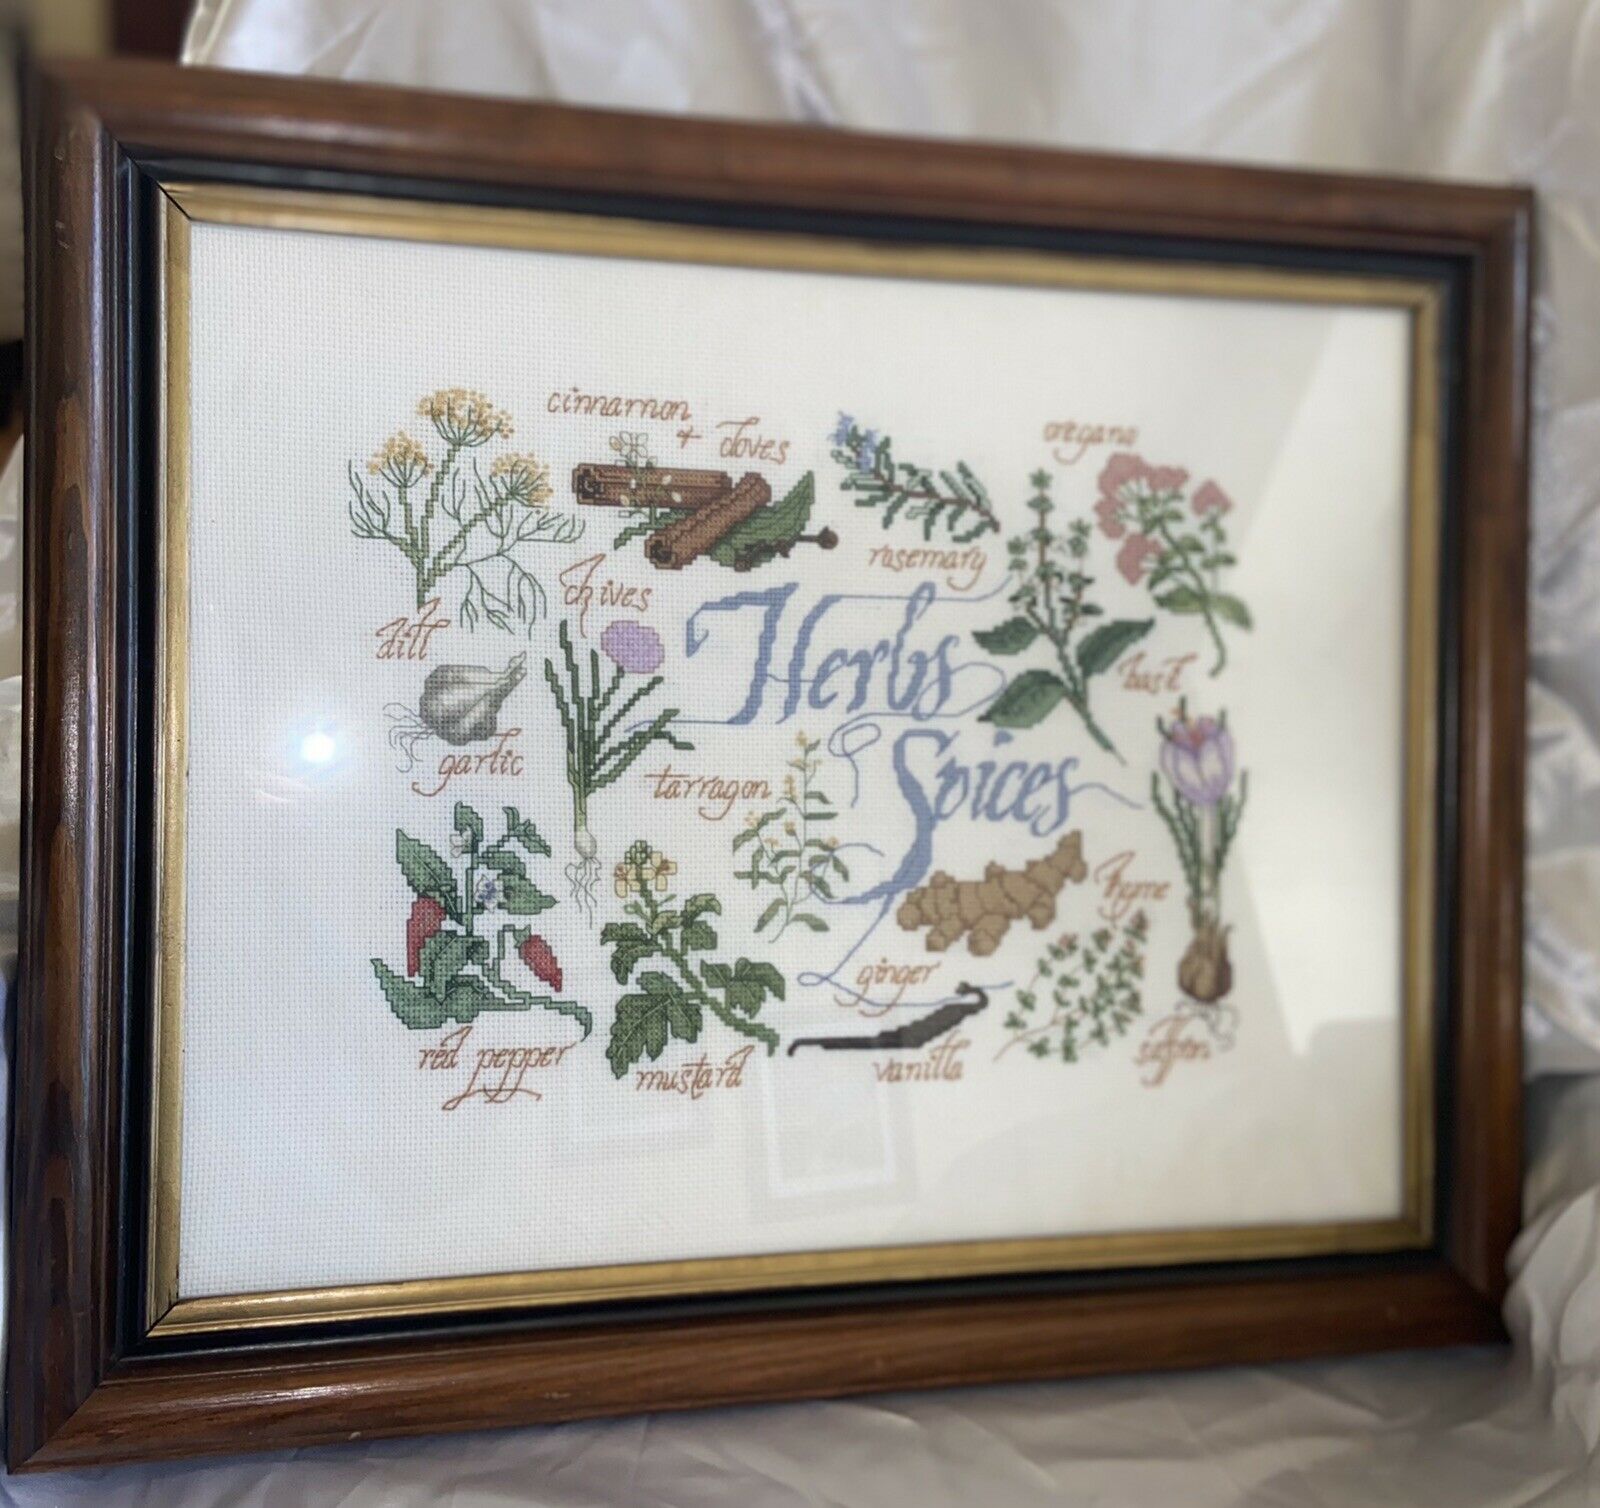 Completed Cross Stitch Framed Jana Lynne “herbs & Spices” 17 1/2 C 21 1/2